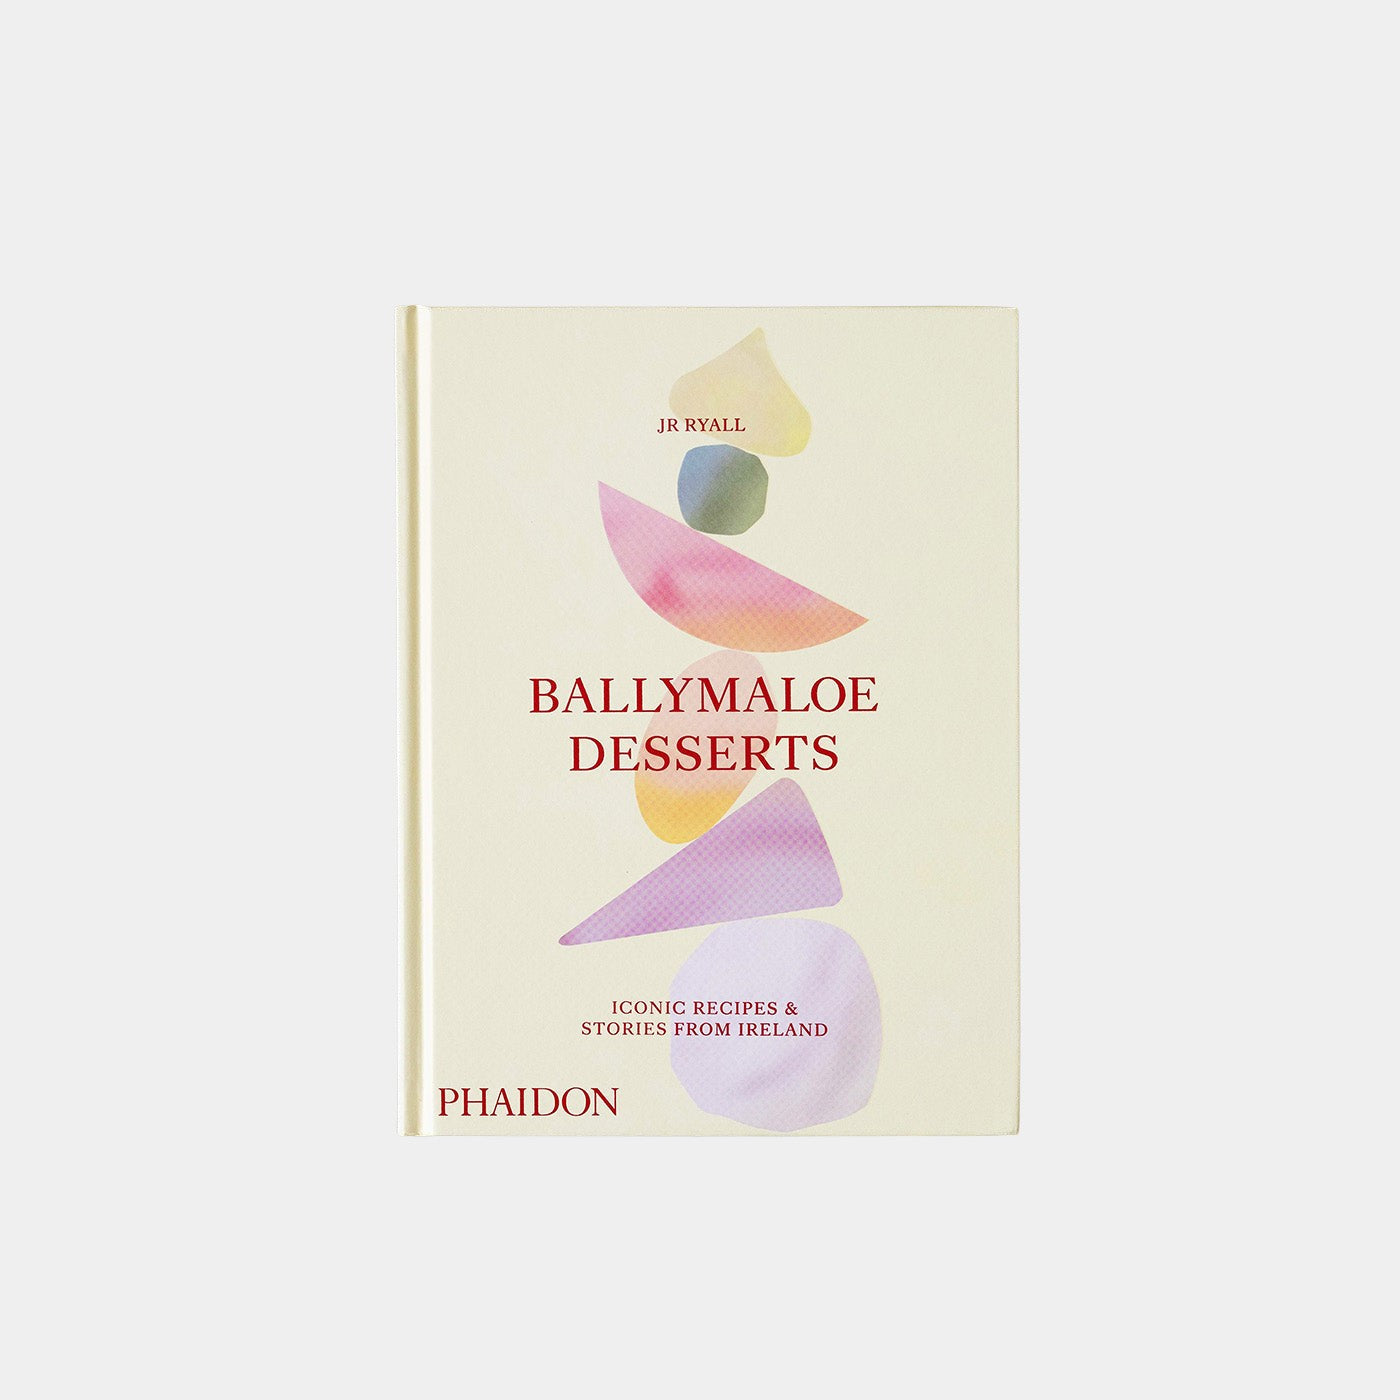 Ballymaloe Desserts: Iconic Recipes and Stories from Ireland - JR Ryall